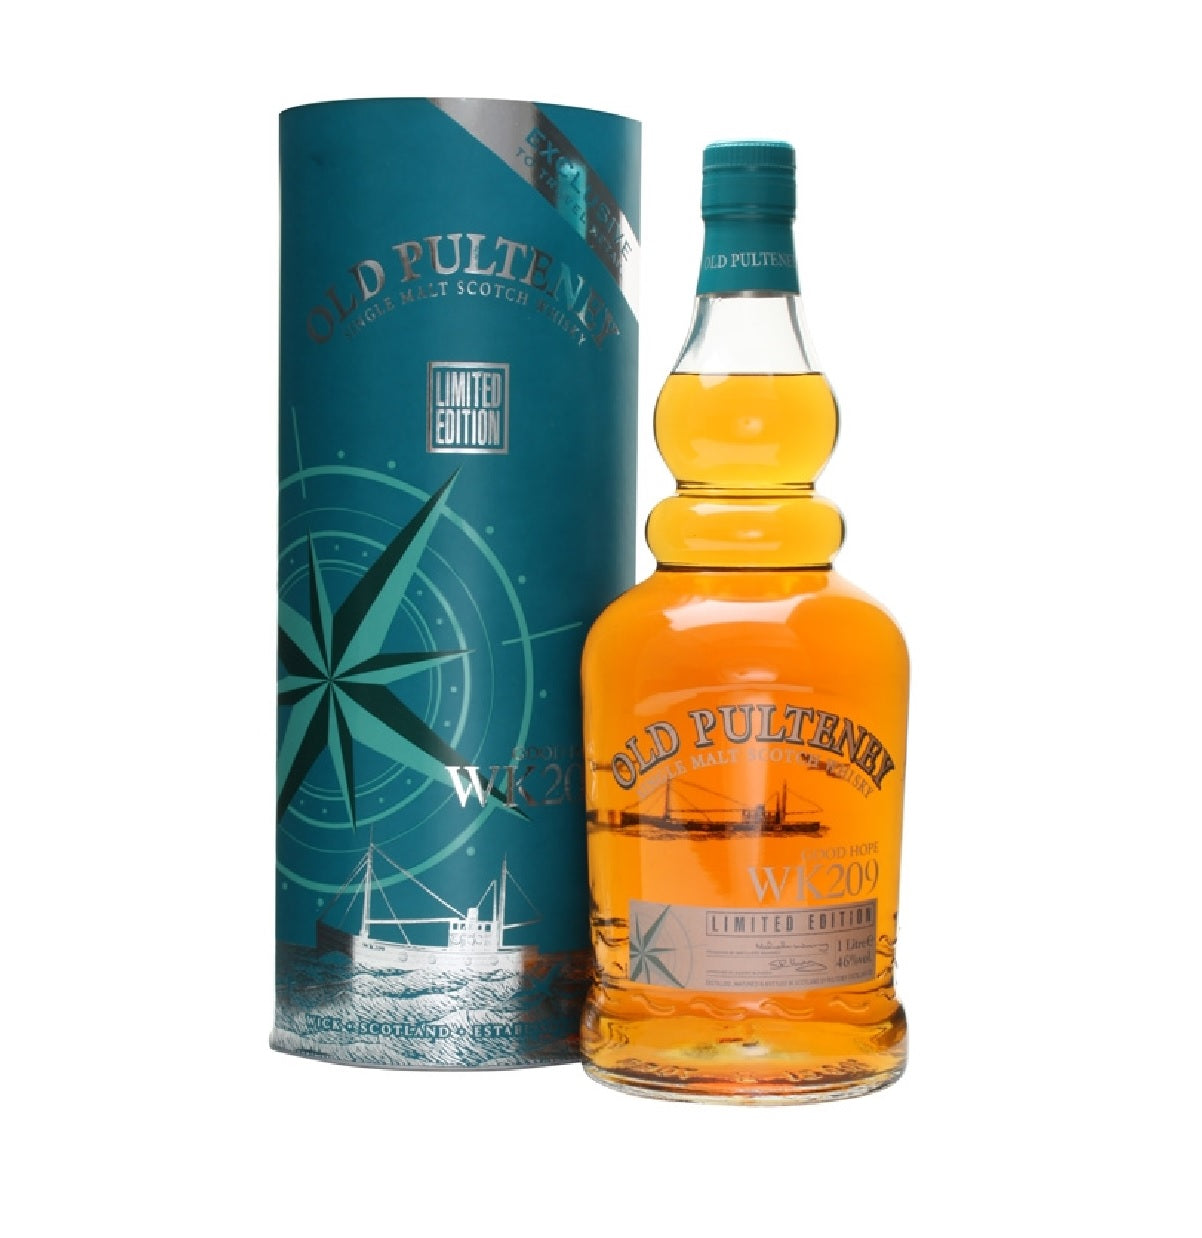 Old Pulteney 'Good hope WK209' limited edition